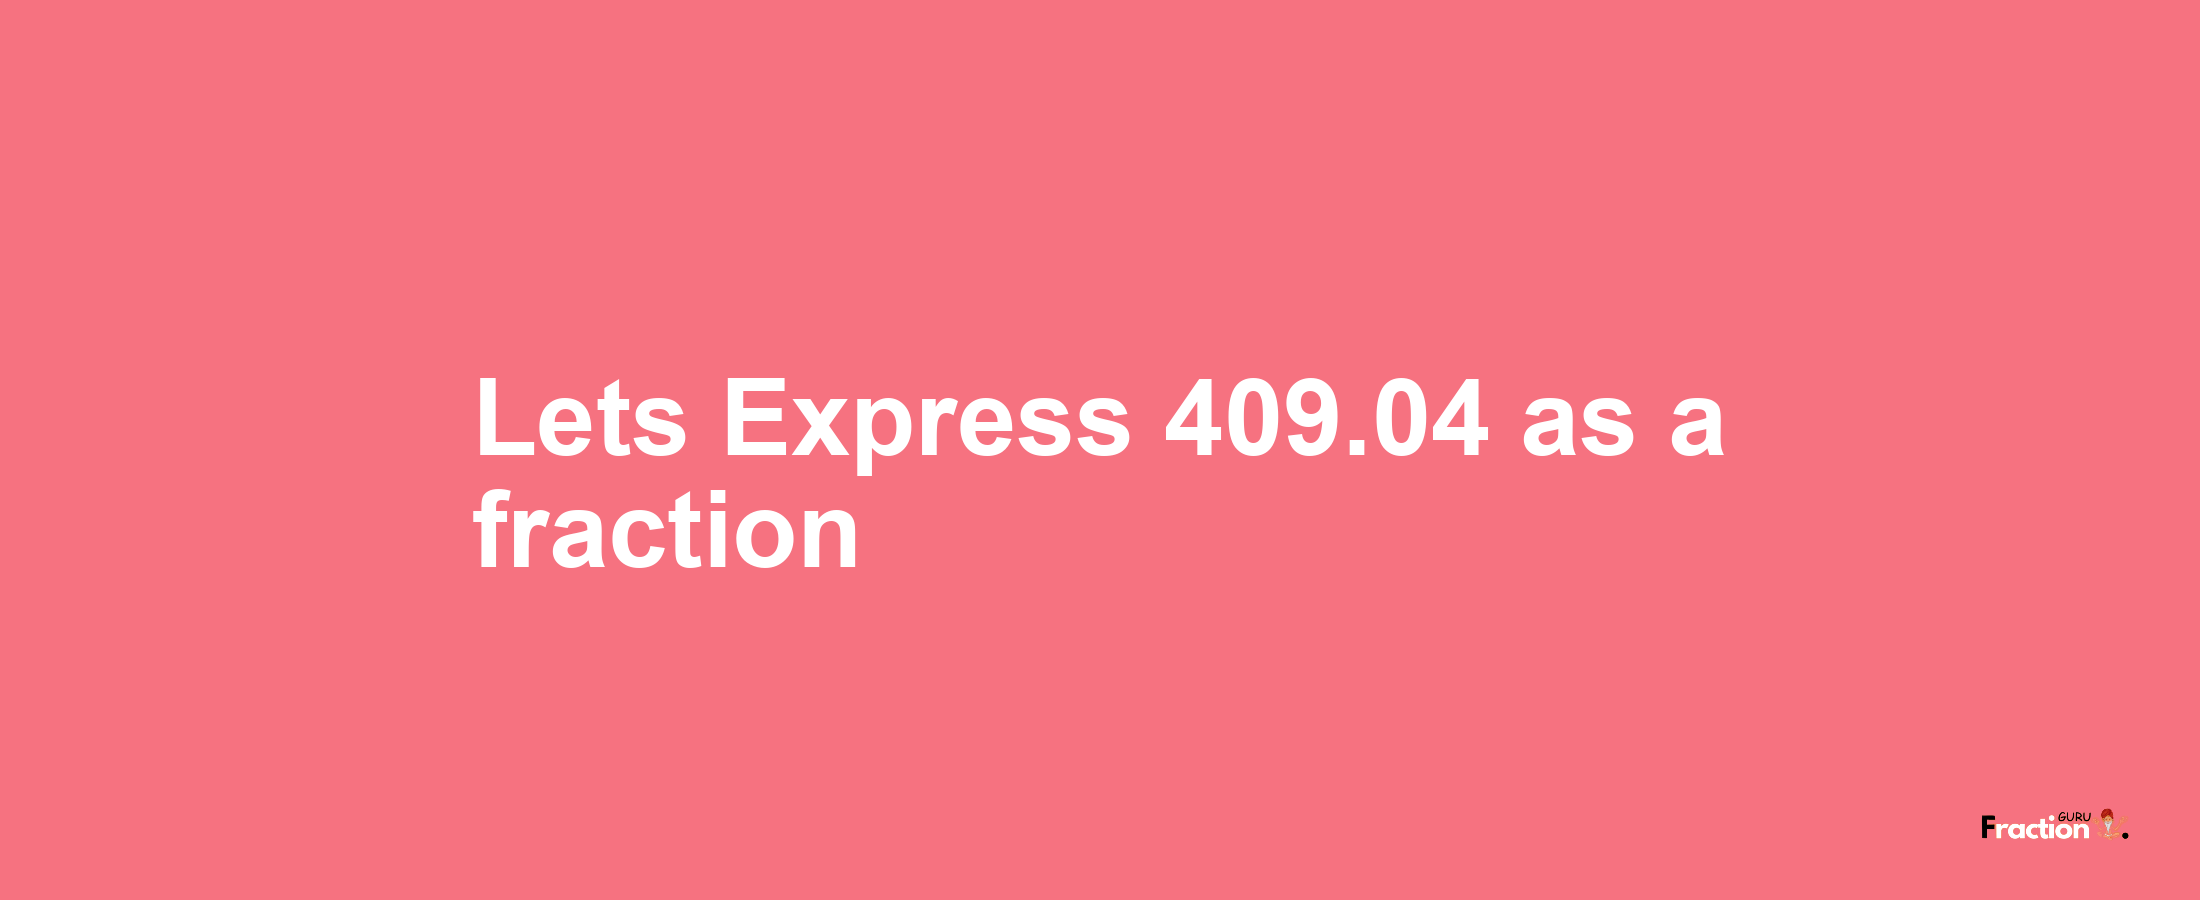 Lets Express 409.04 as afraction